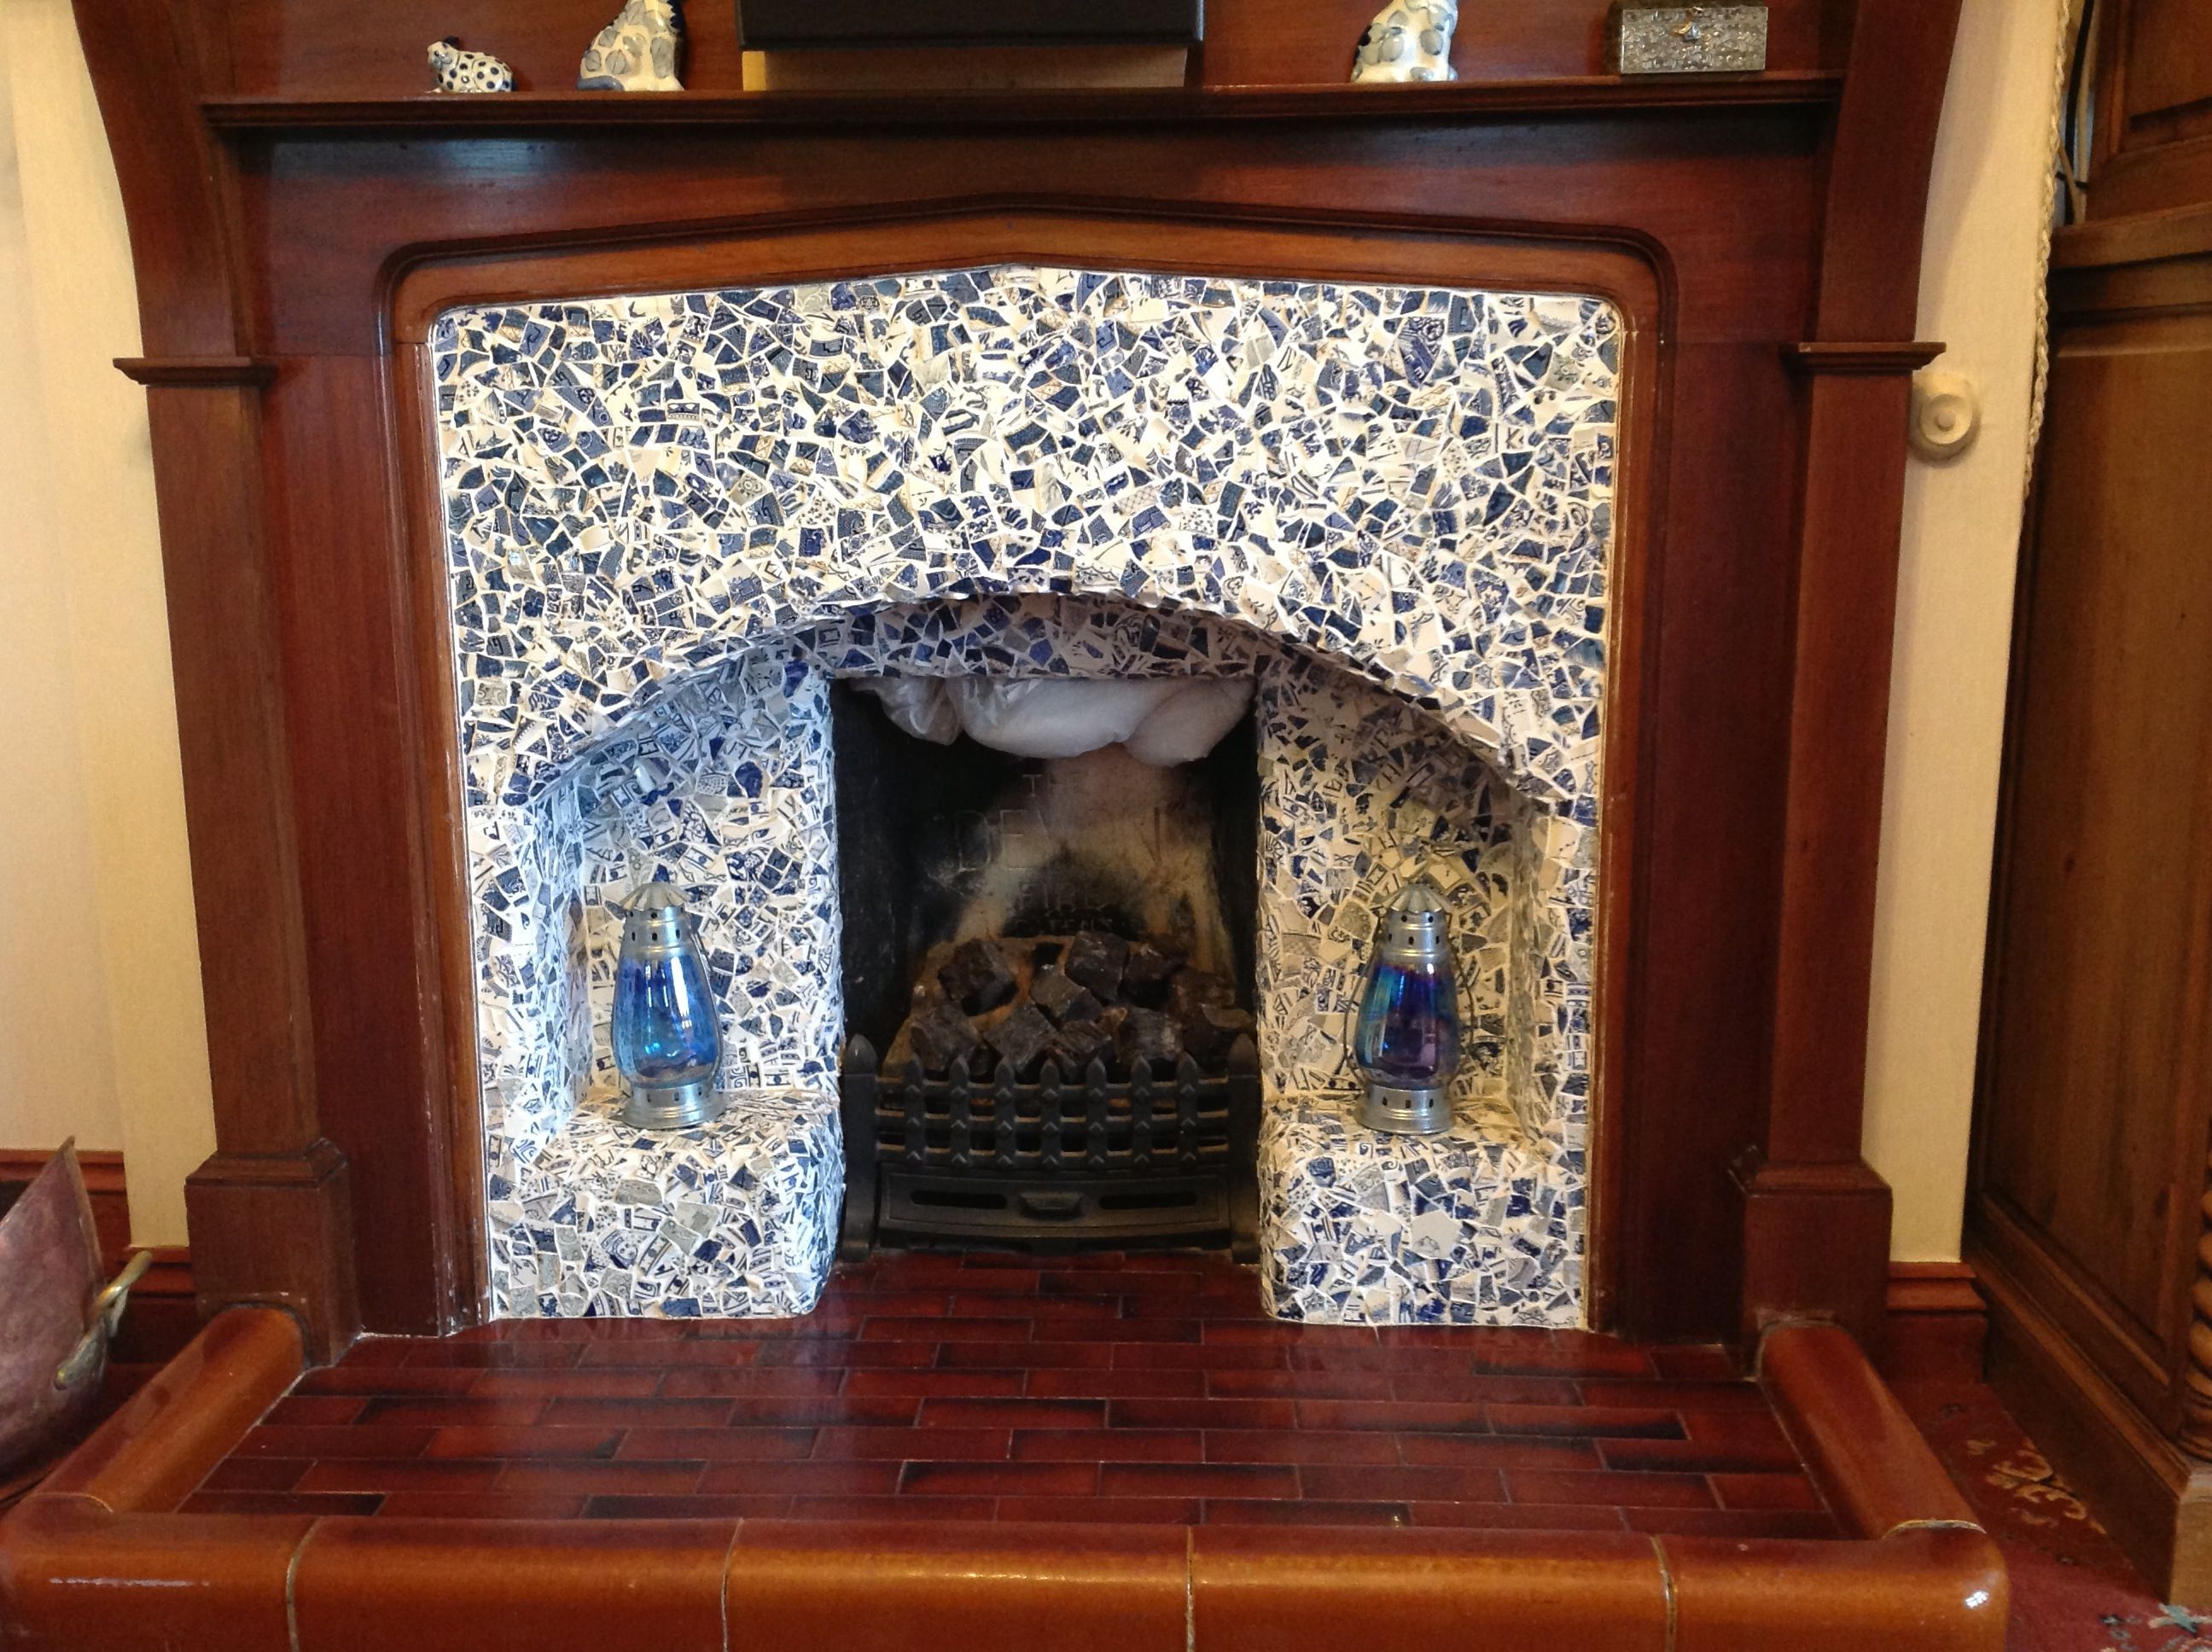 Cement Board Fireplace Inspirational Fireplace Mosaic Made From Blue and White China Pieces